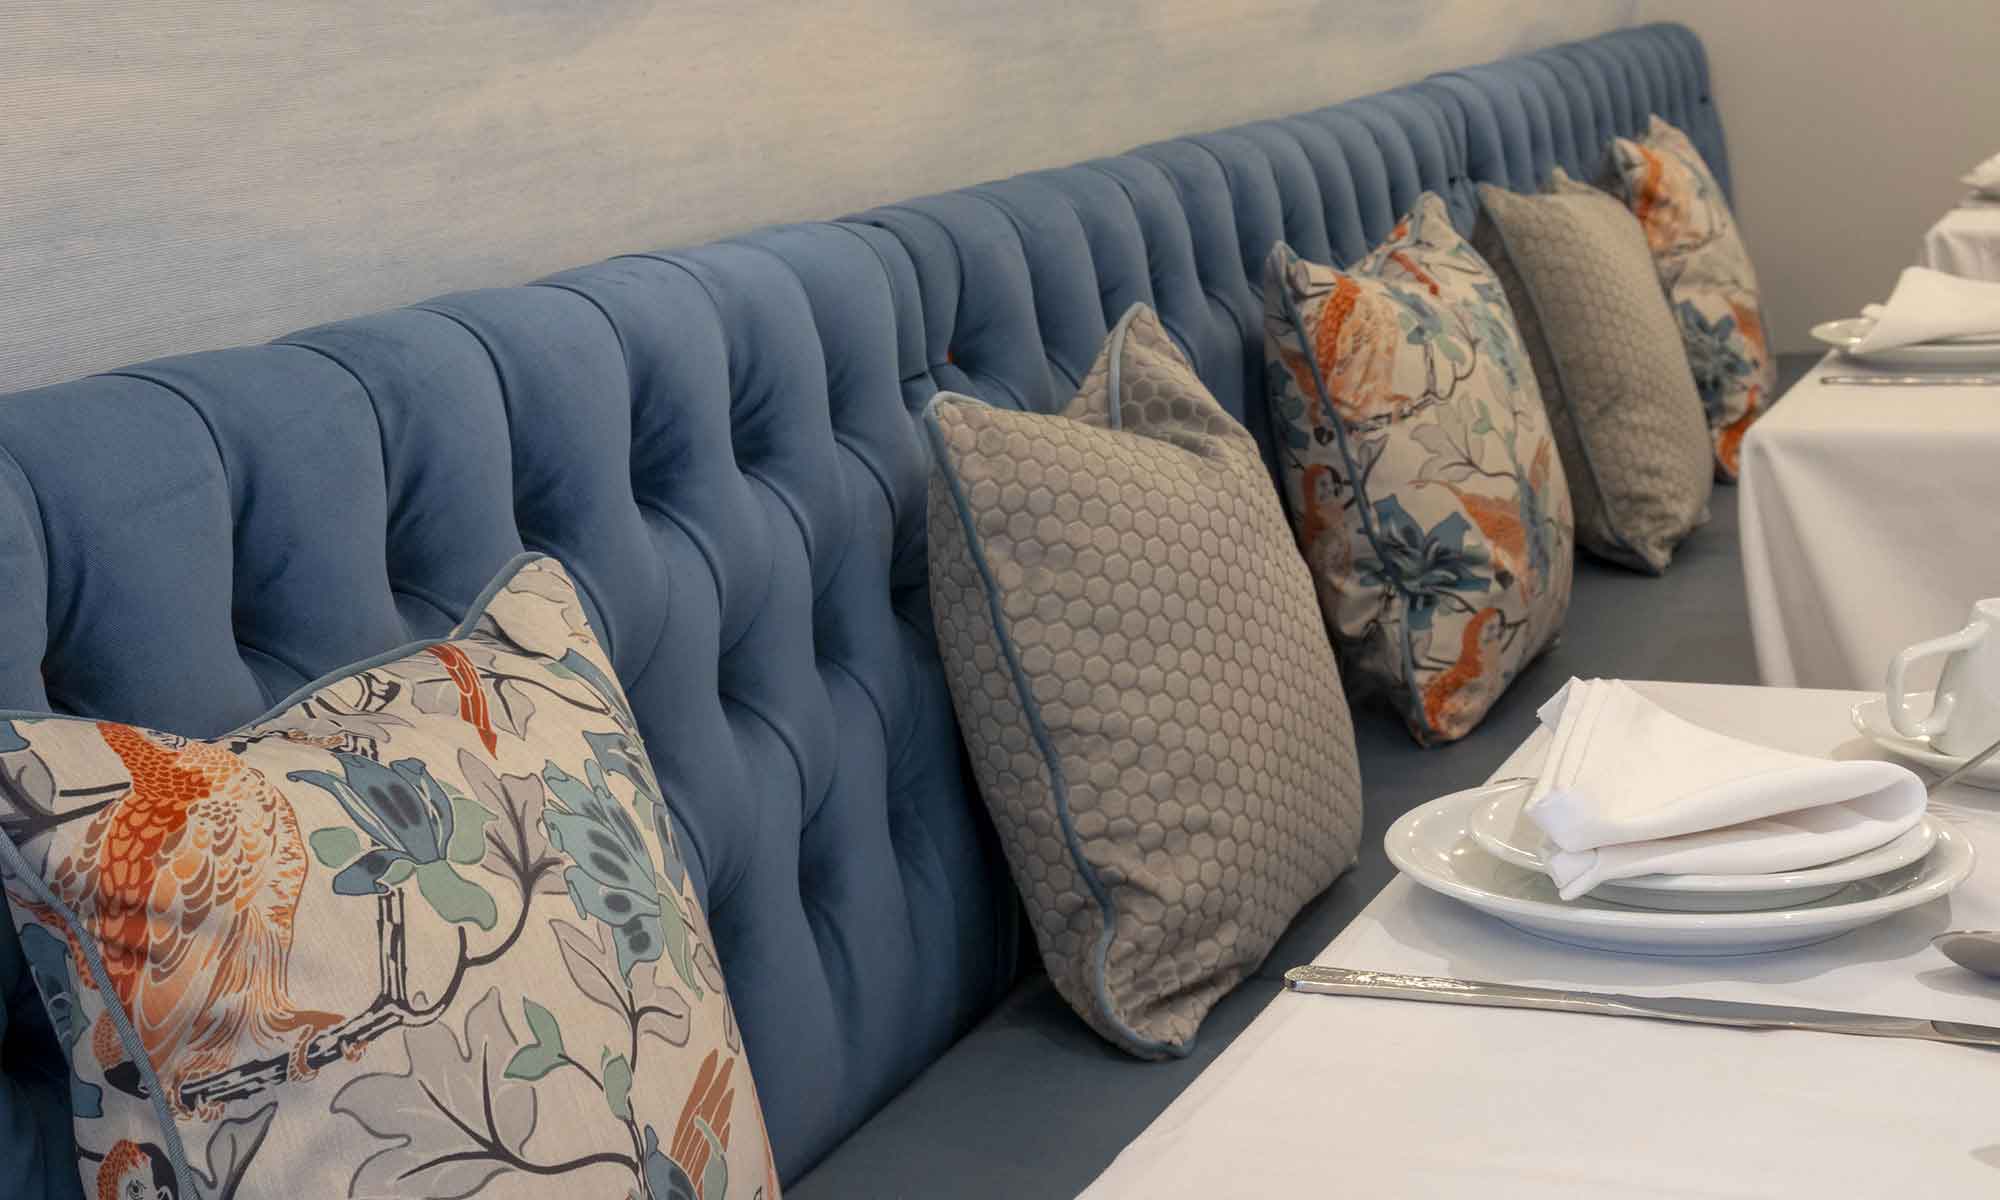 Dining room interior of St Mary's Care Home, a close up of pale blue banquette seating with contrasting scatter cushions.